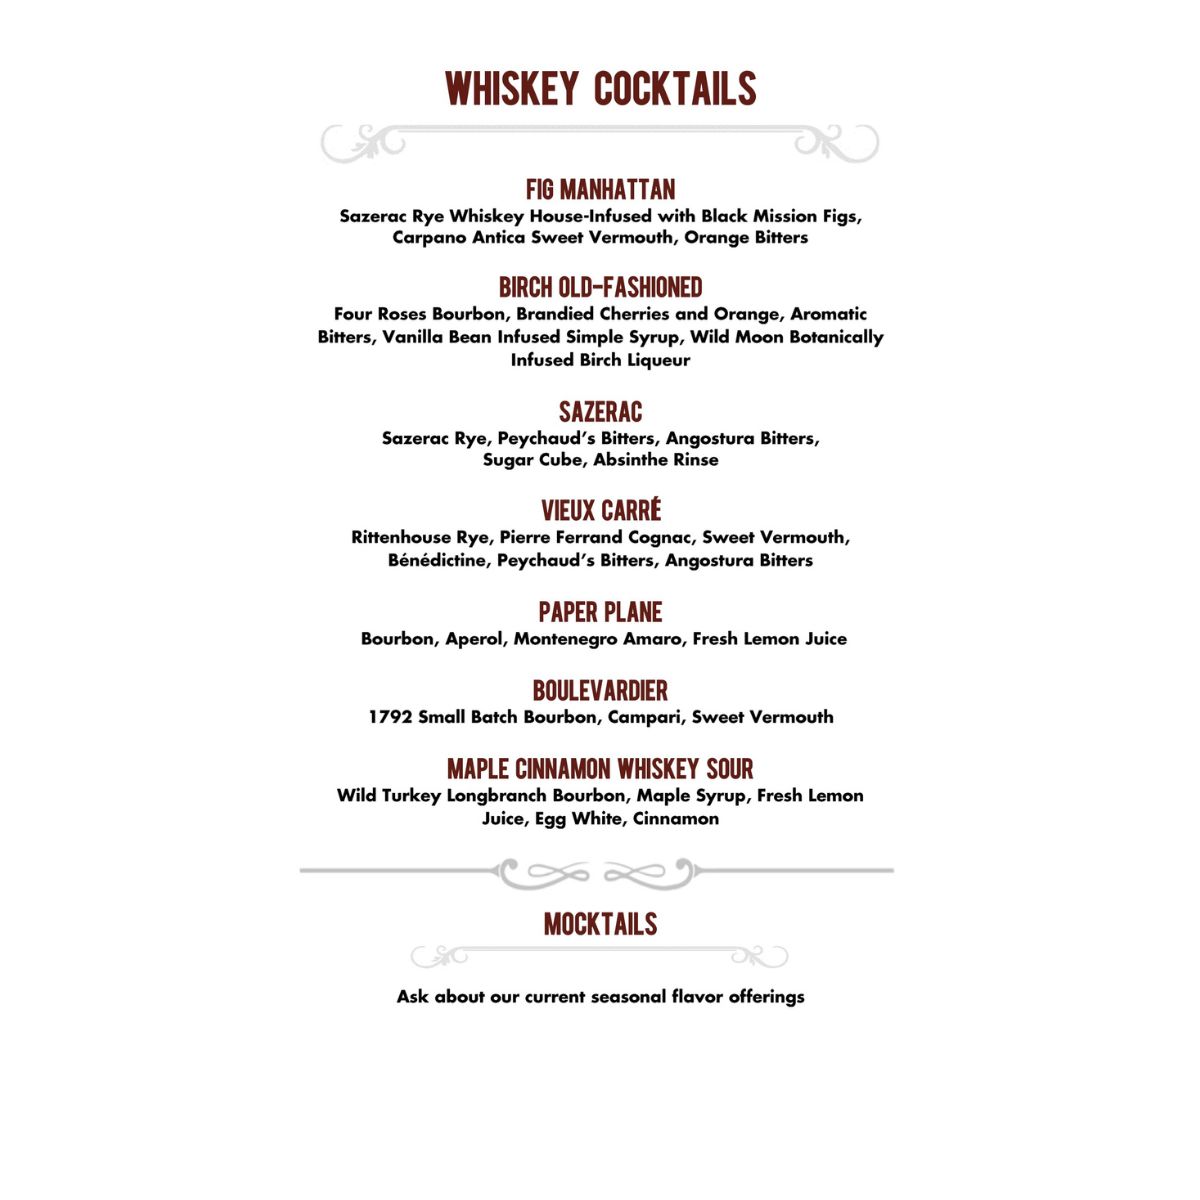 WHISKEY COCKTAILS